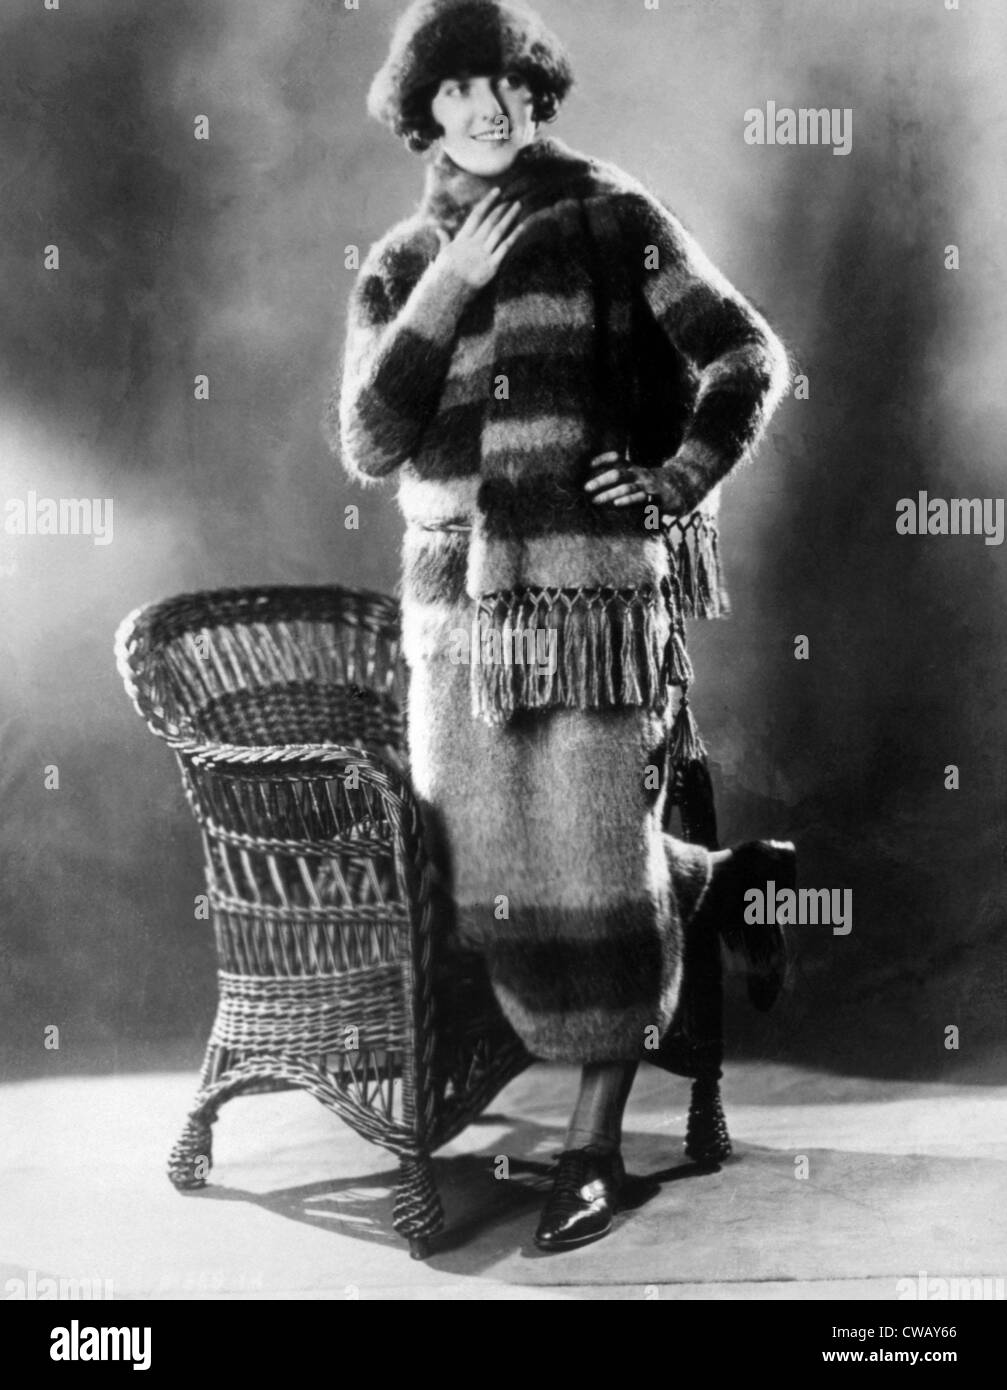 Skating outfit consisting of sweater, skirt, scarf, and hat, circa 1922. Photo: Courtesy Everett Collection Stock Photo